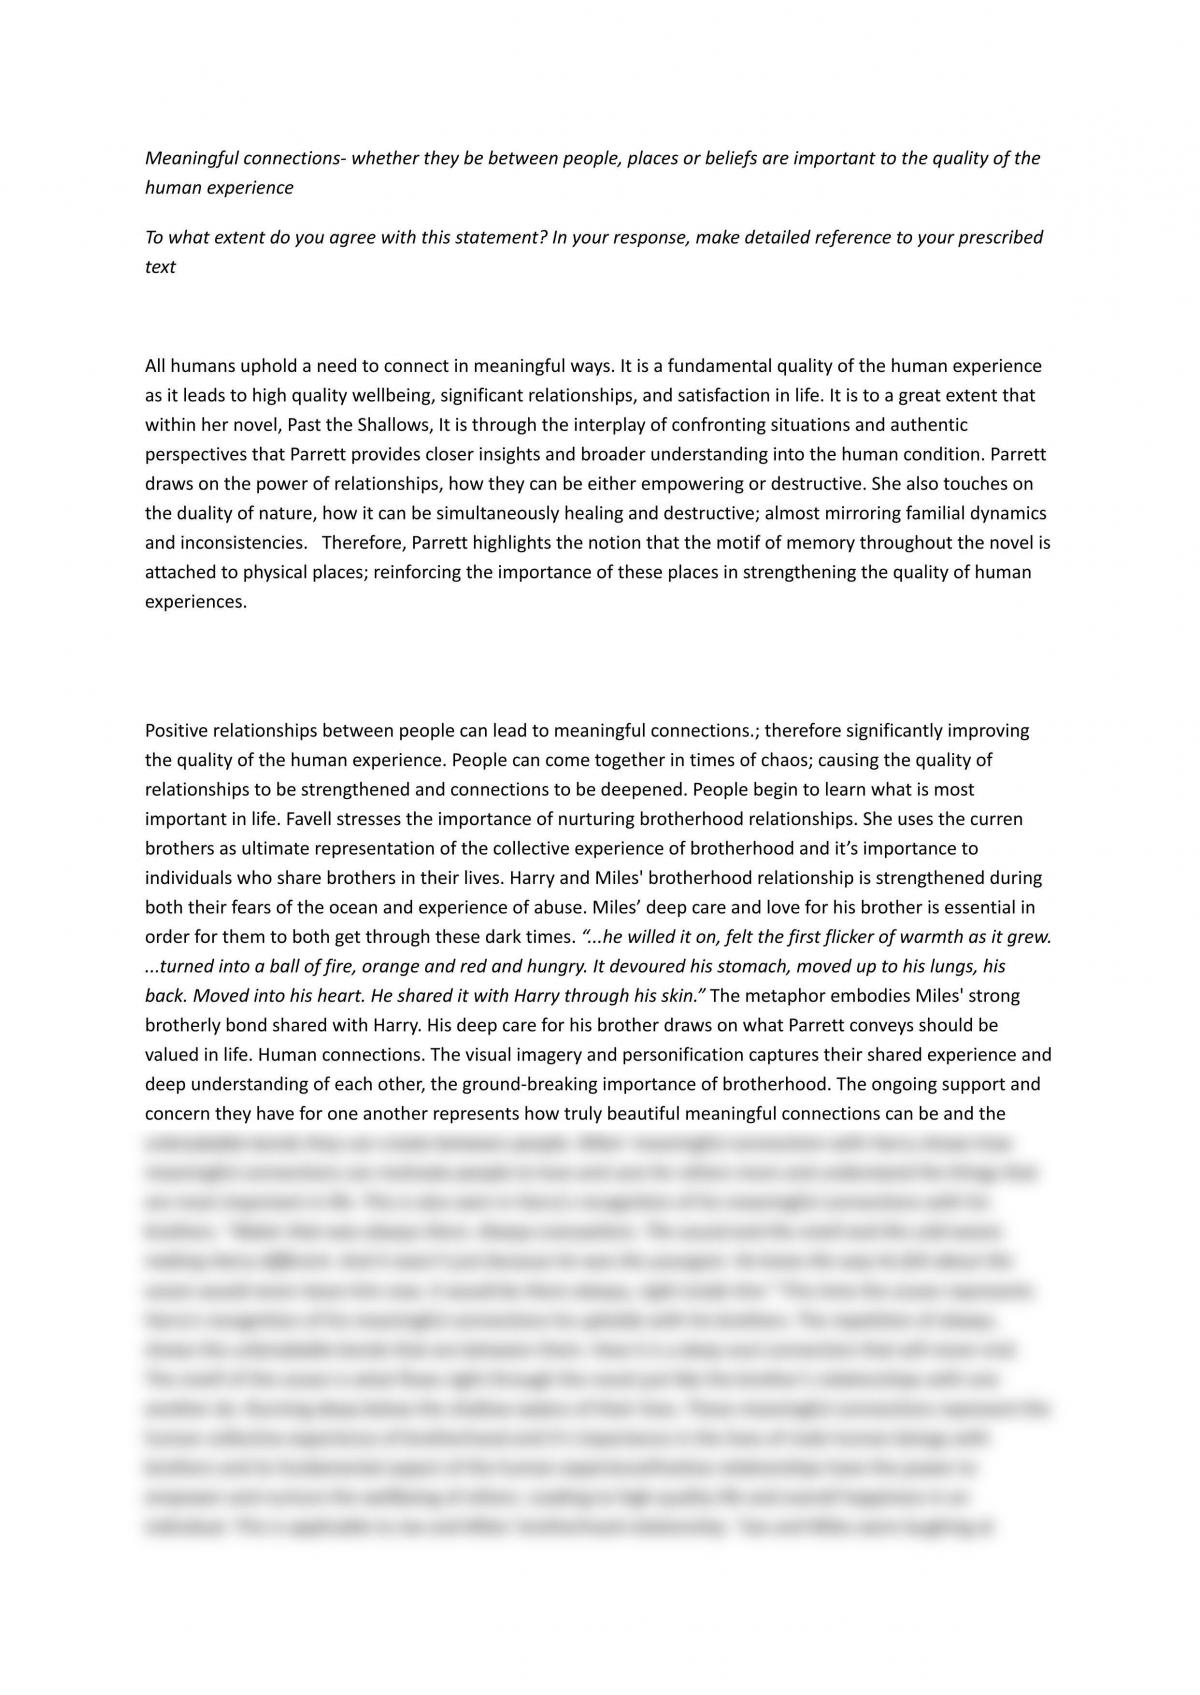 past the shallows human experience essay